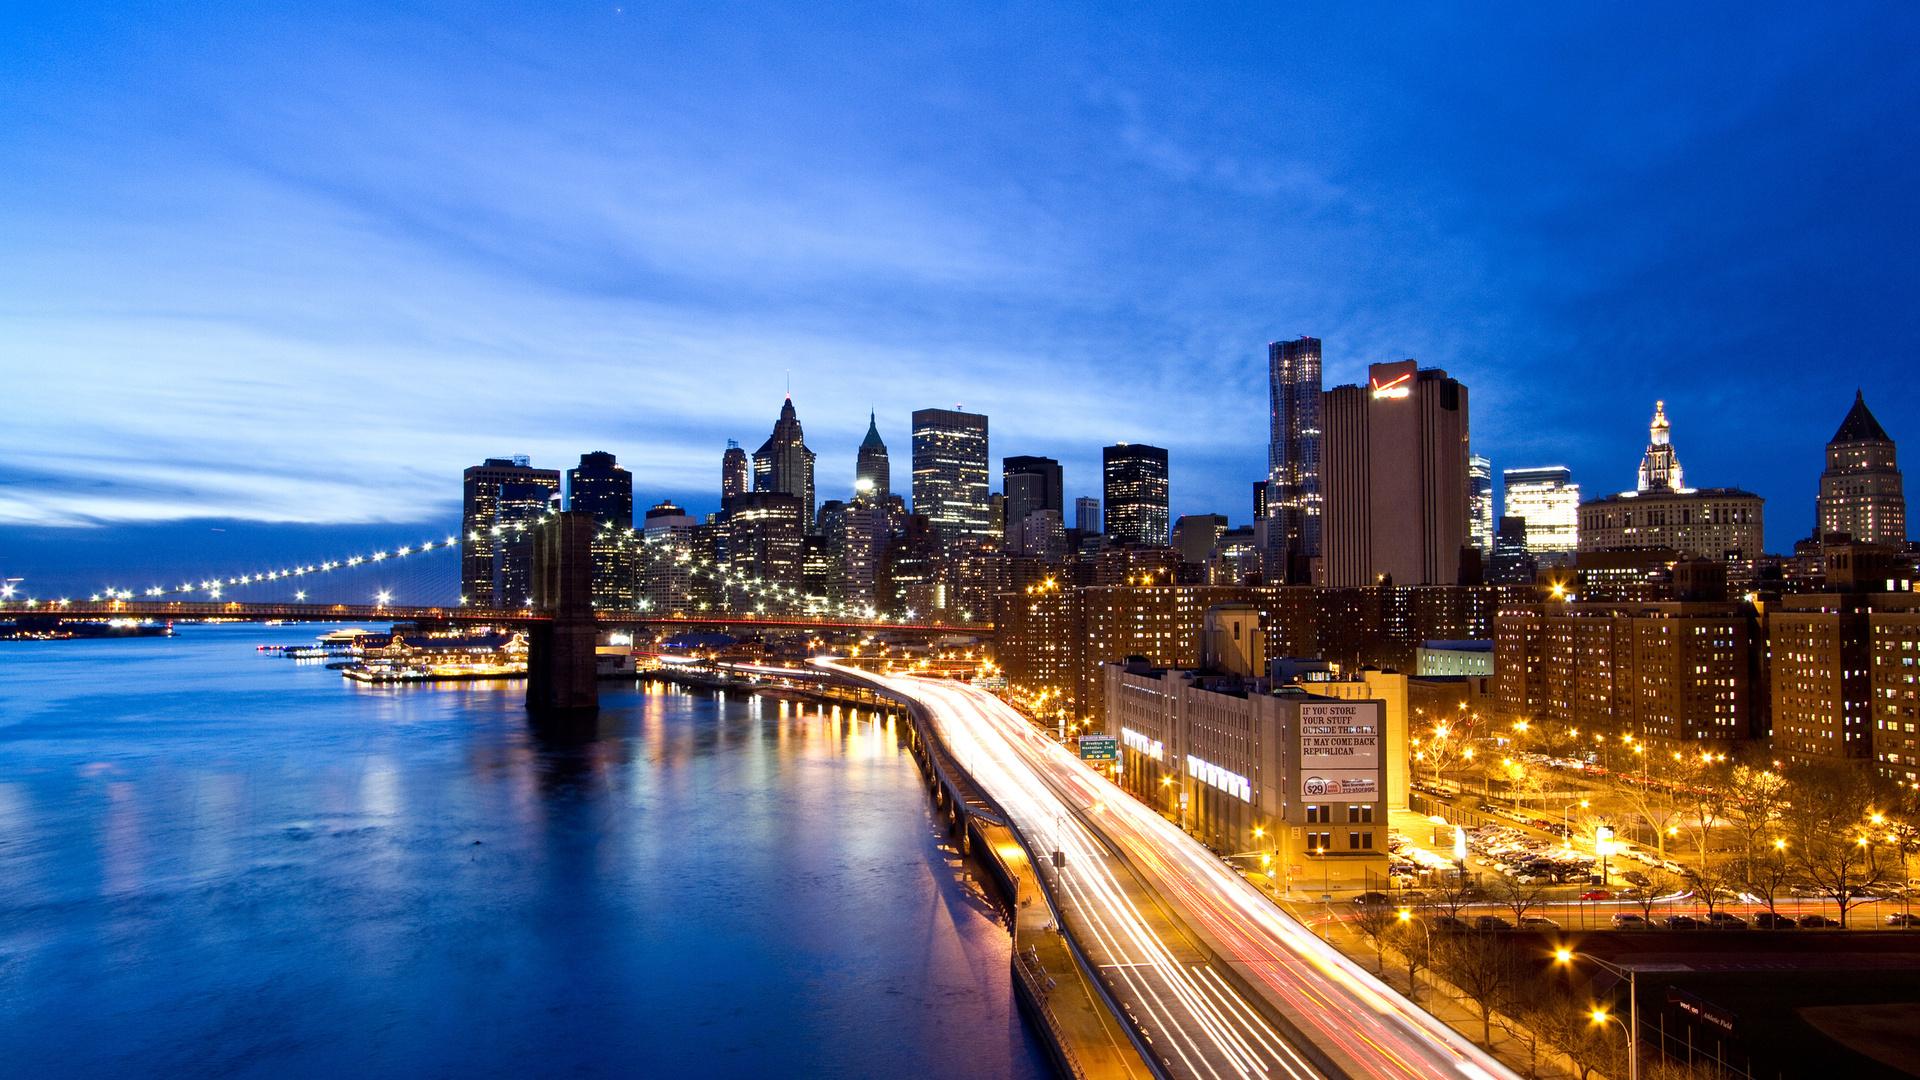 Fdr Drive On The East Side Of Manhattan - New York City Desktop Wallpapers Hd , HD Wallpaper & Backgrounds